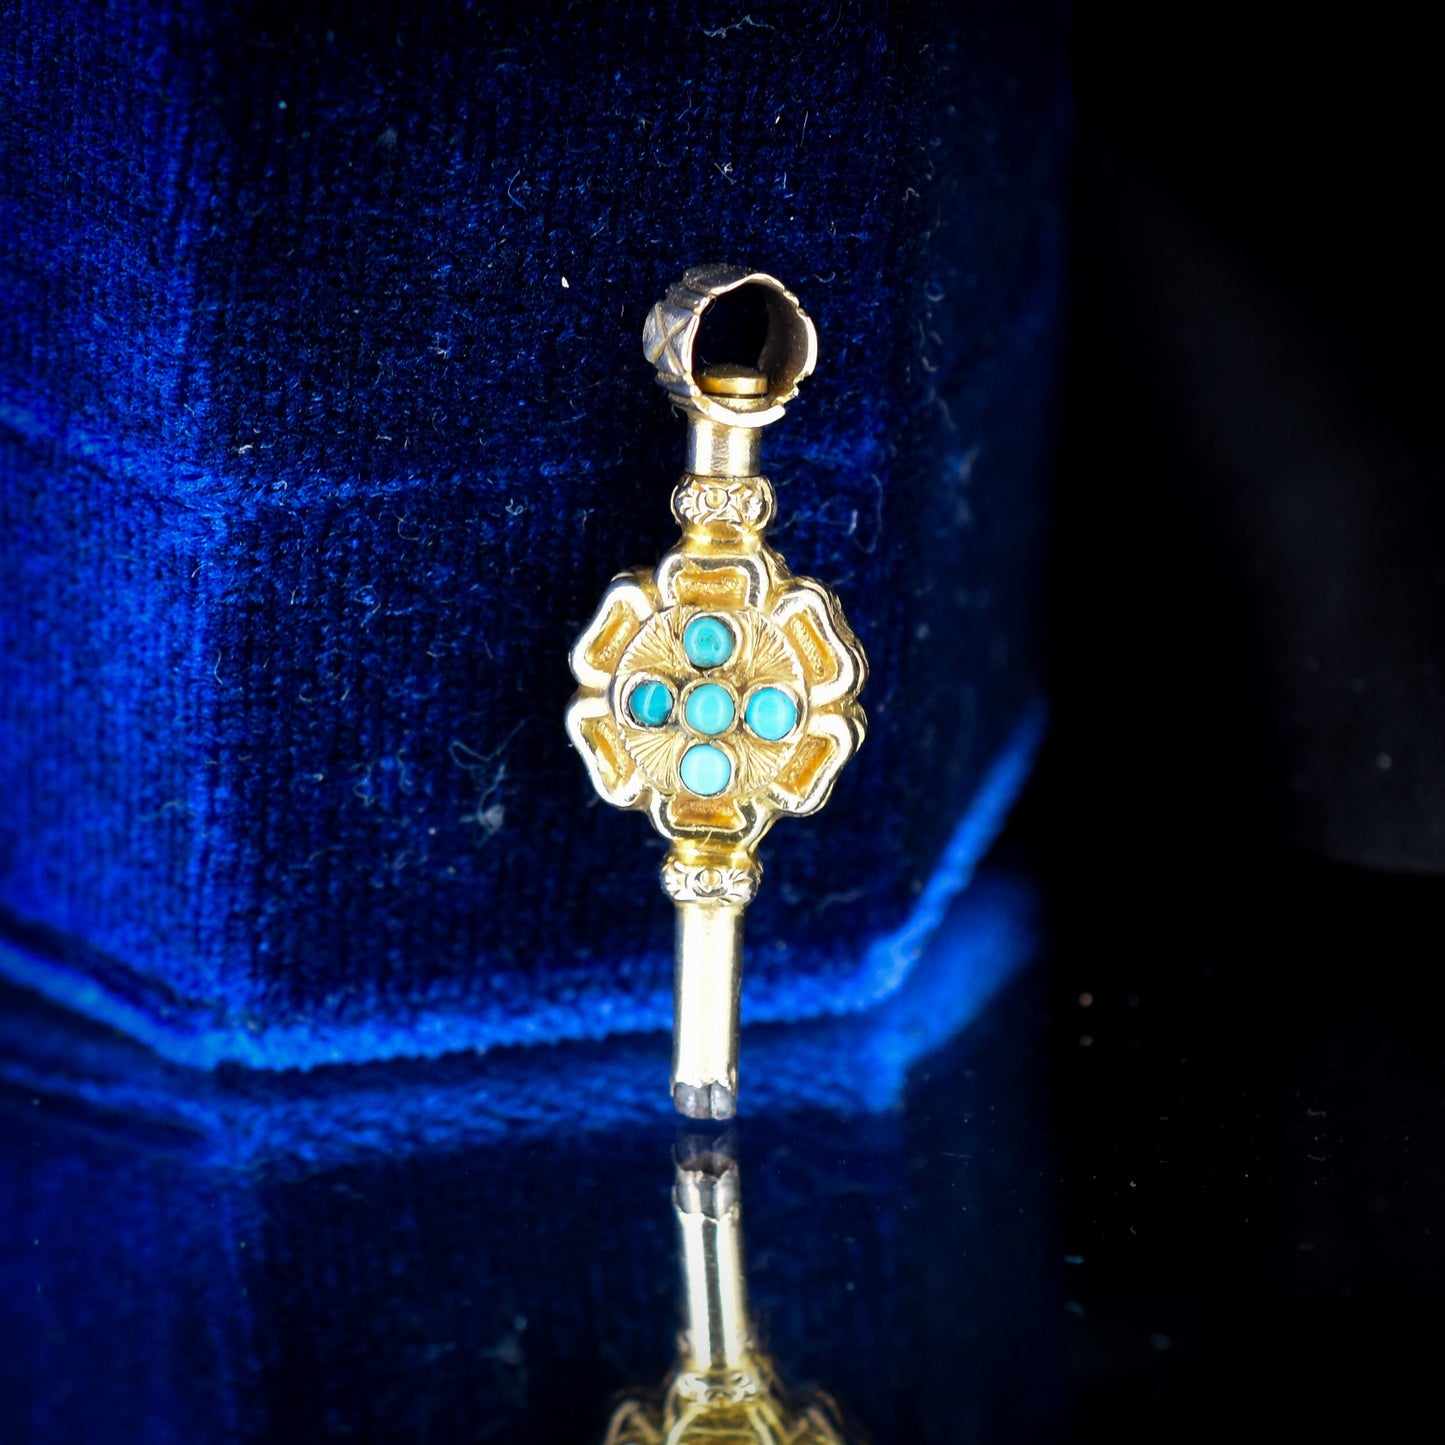 Antique Turquoise Gold Watch Key Fob Pendant Charm